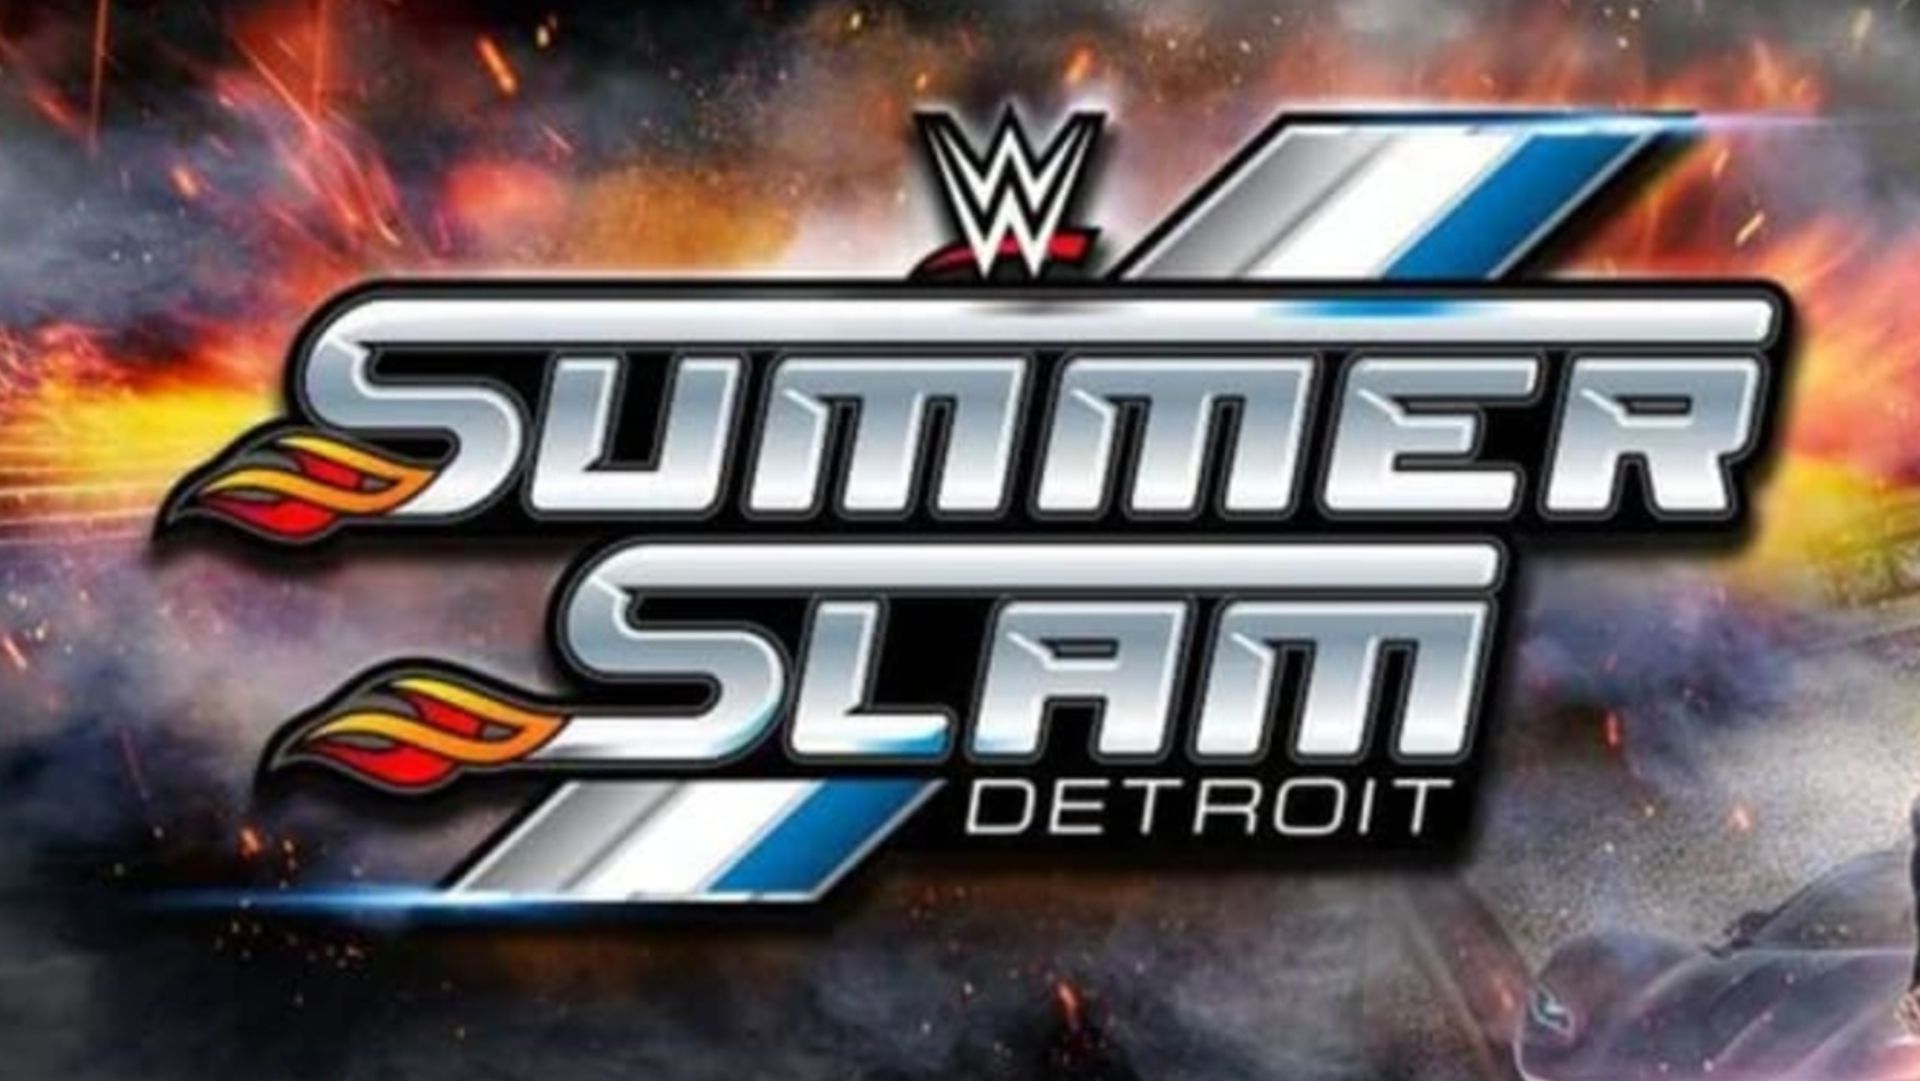 WWE SummerSlam is scheduled for August 5th, 2023.